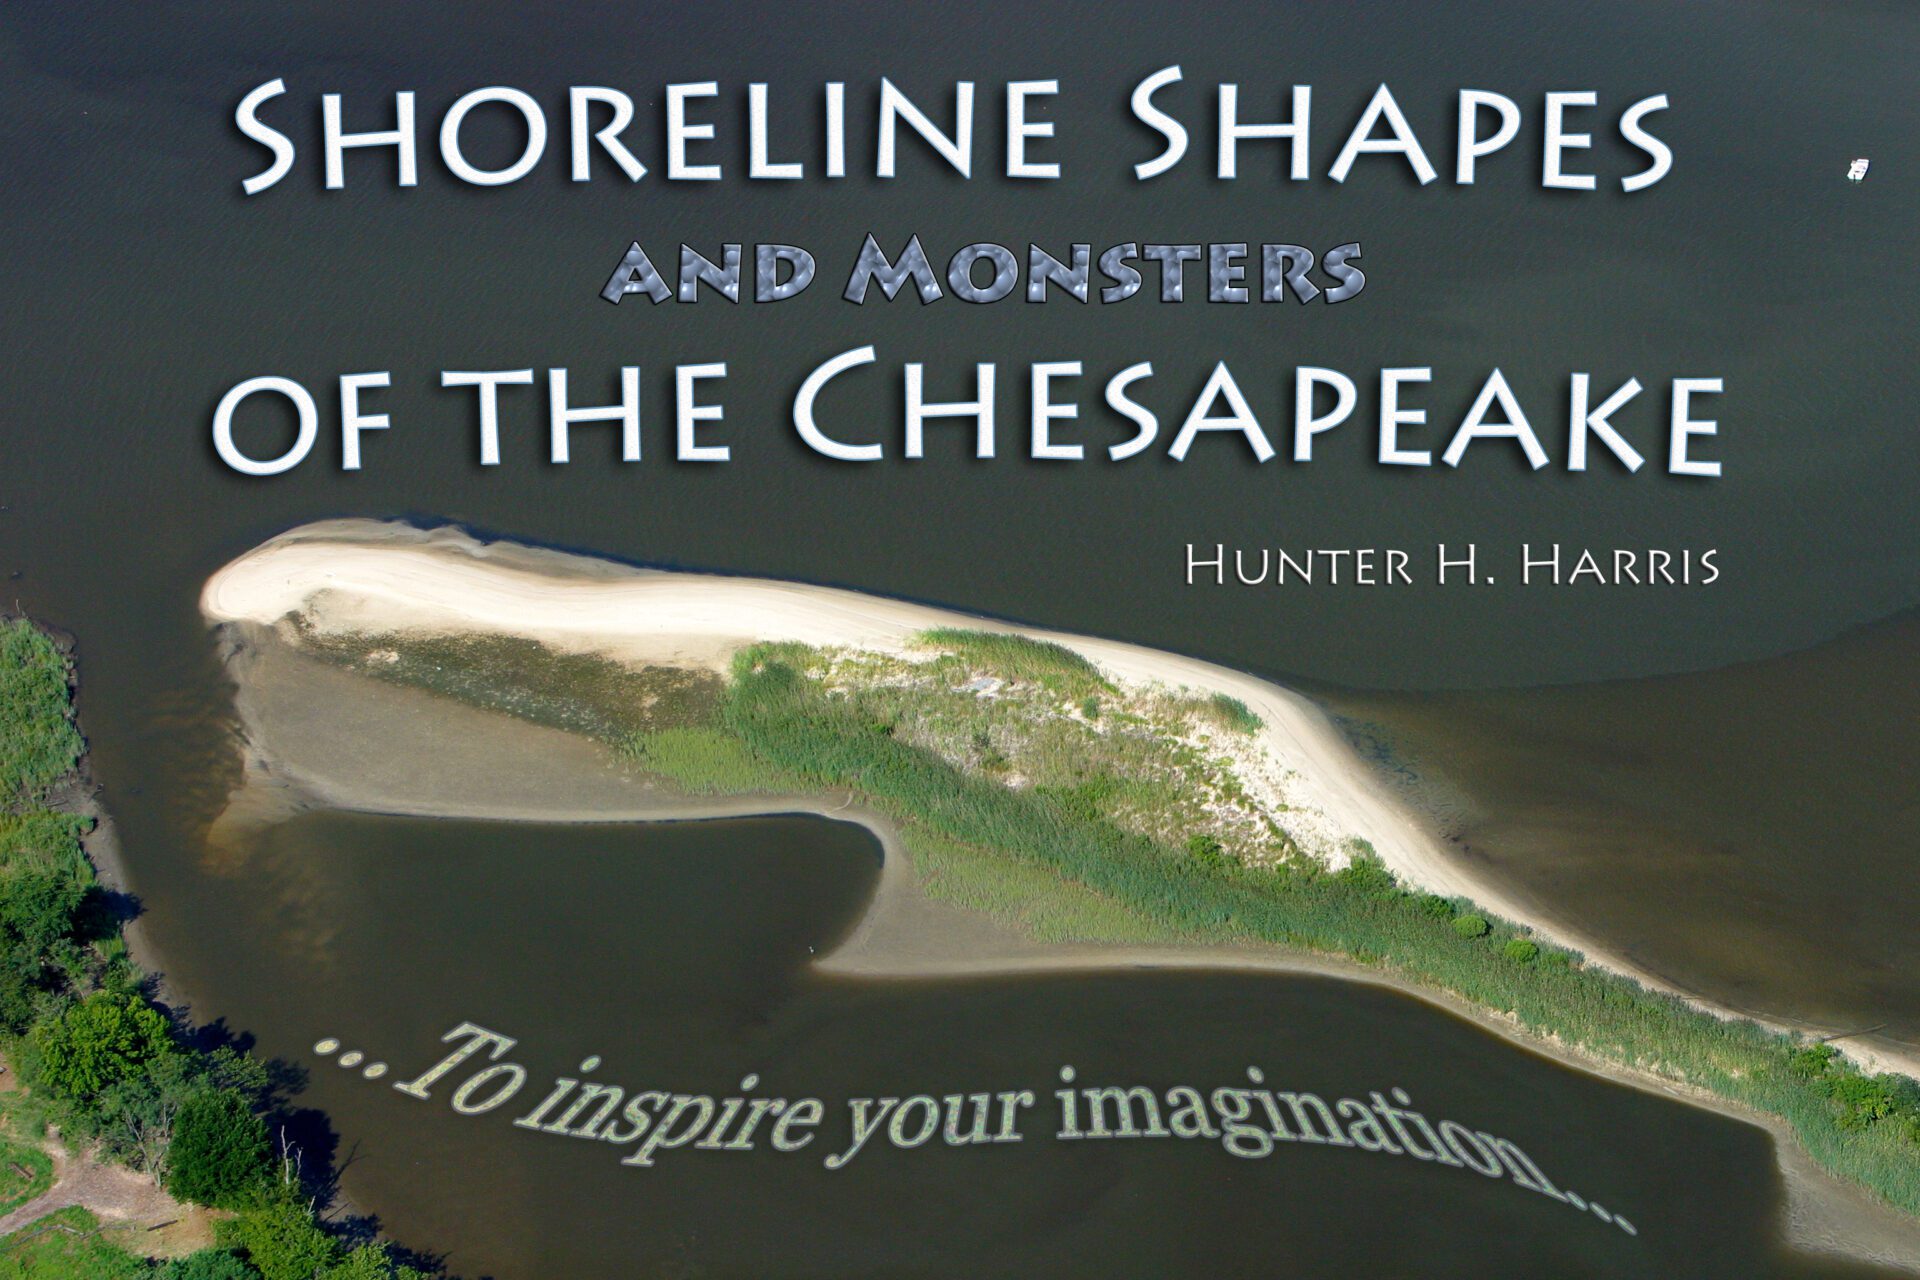 A book cover with the title of shore line shapes and monsters of the chesapeake.